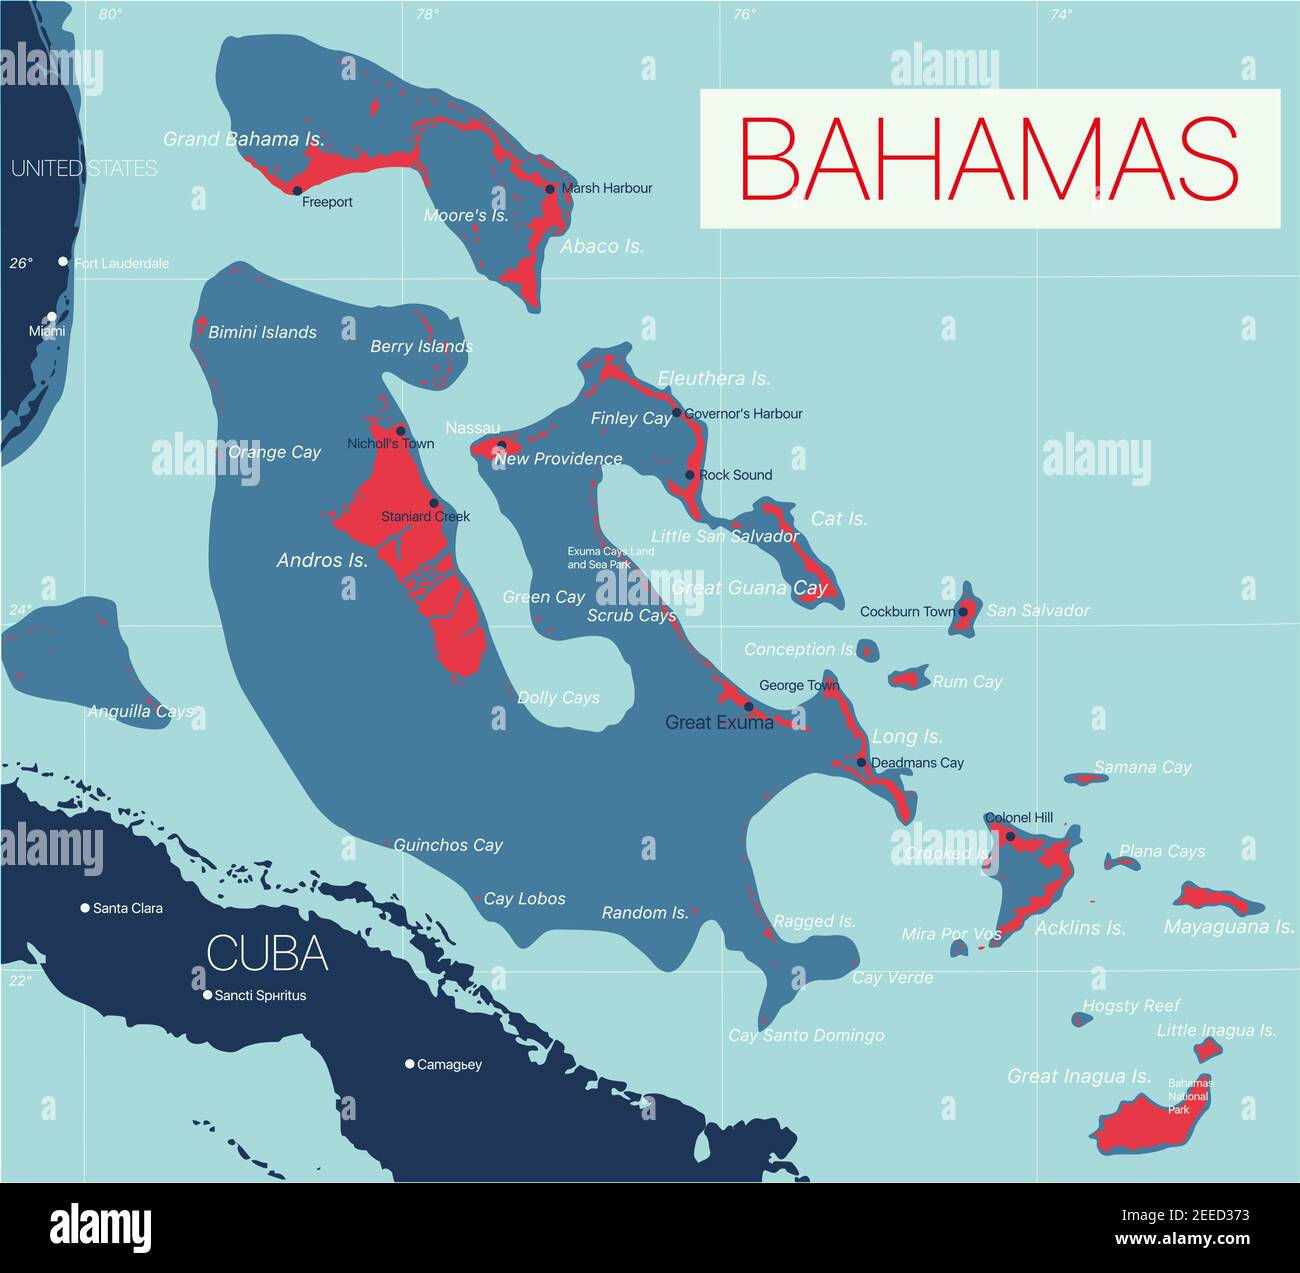 Bahamas detailed editable map with regions cities and towns, roads and railways, geographic sites. Vector EPS-10 file Stock Vector